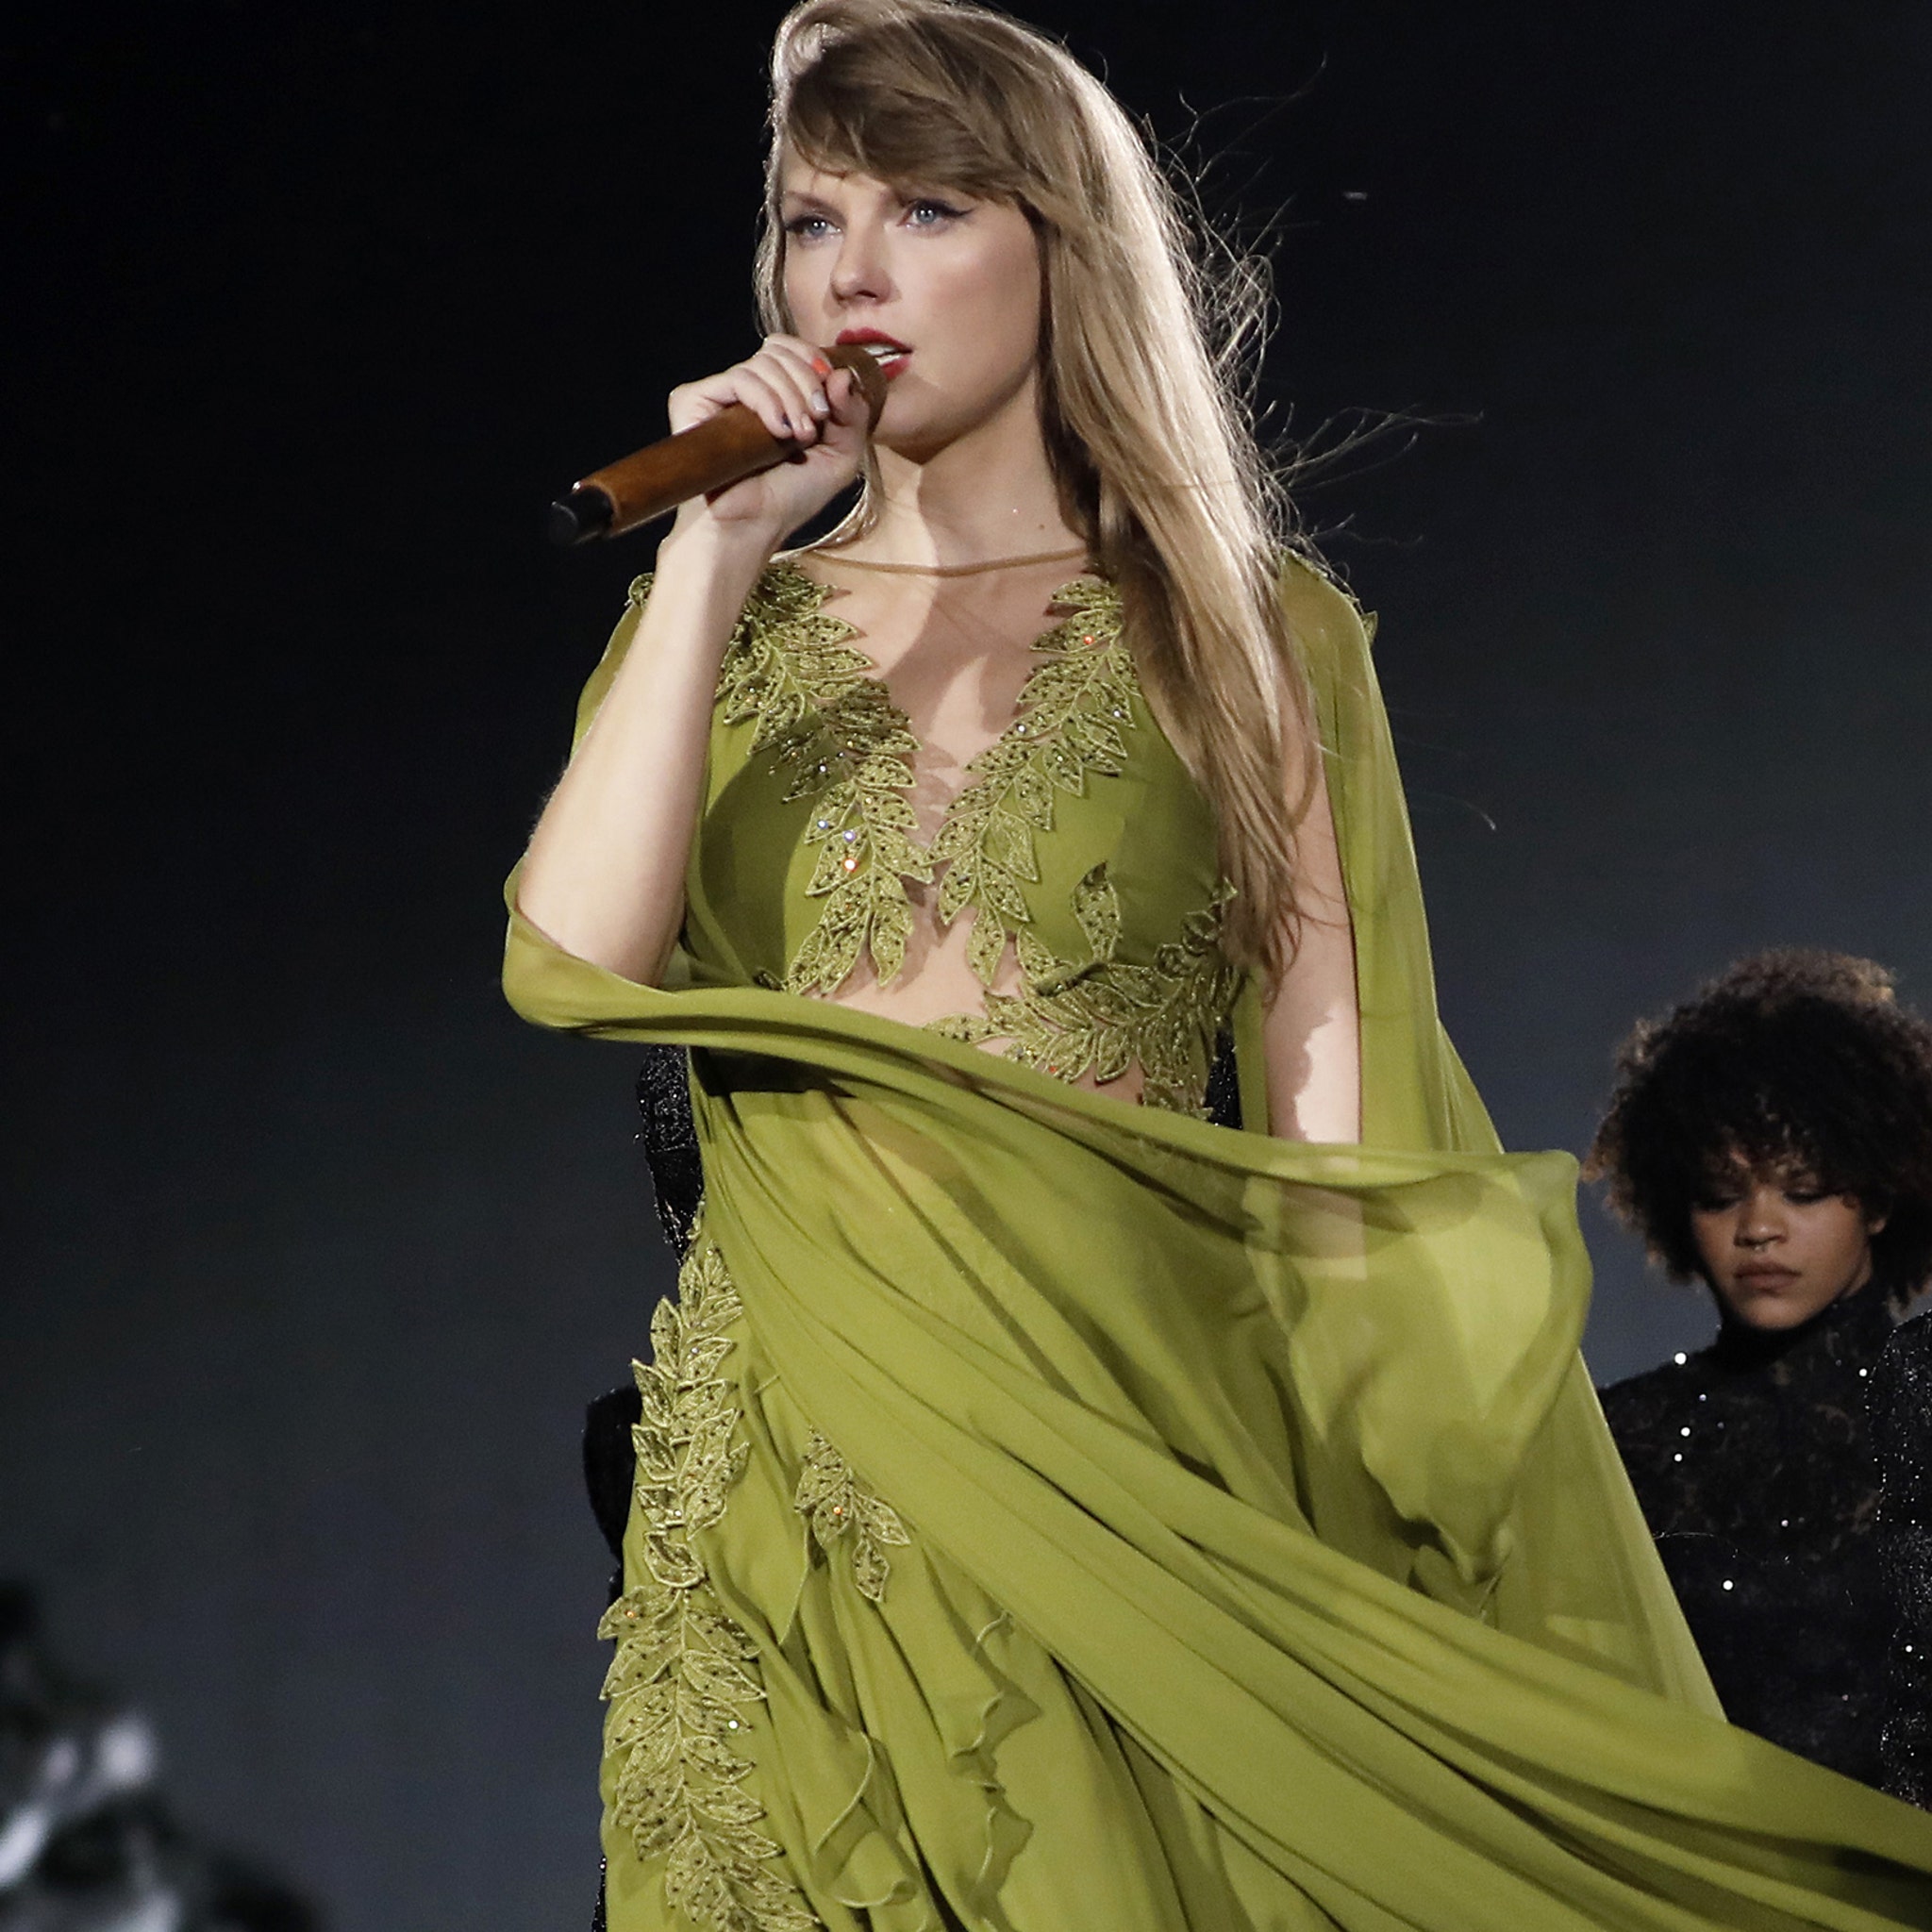 Taylor Swift Is Absolutely 'Bejeweled' in Her 'Eras Tour' Concert